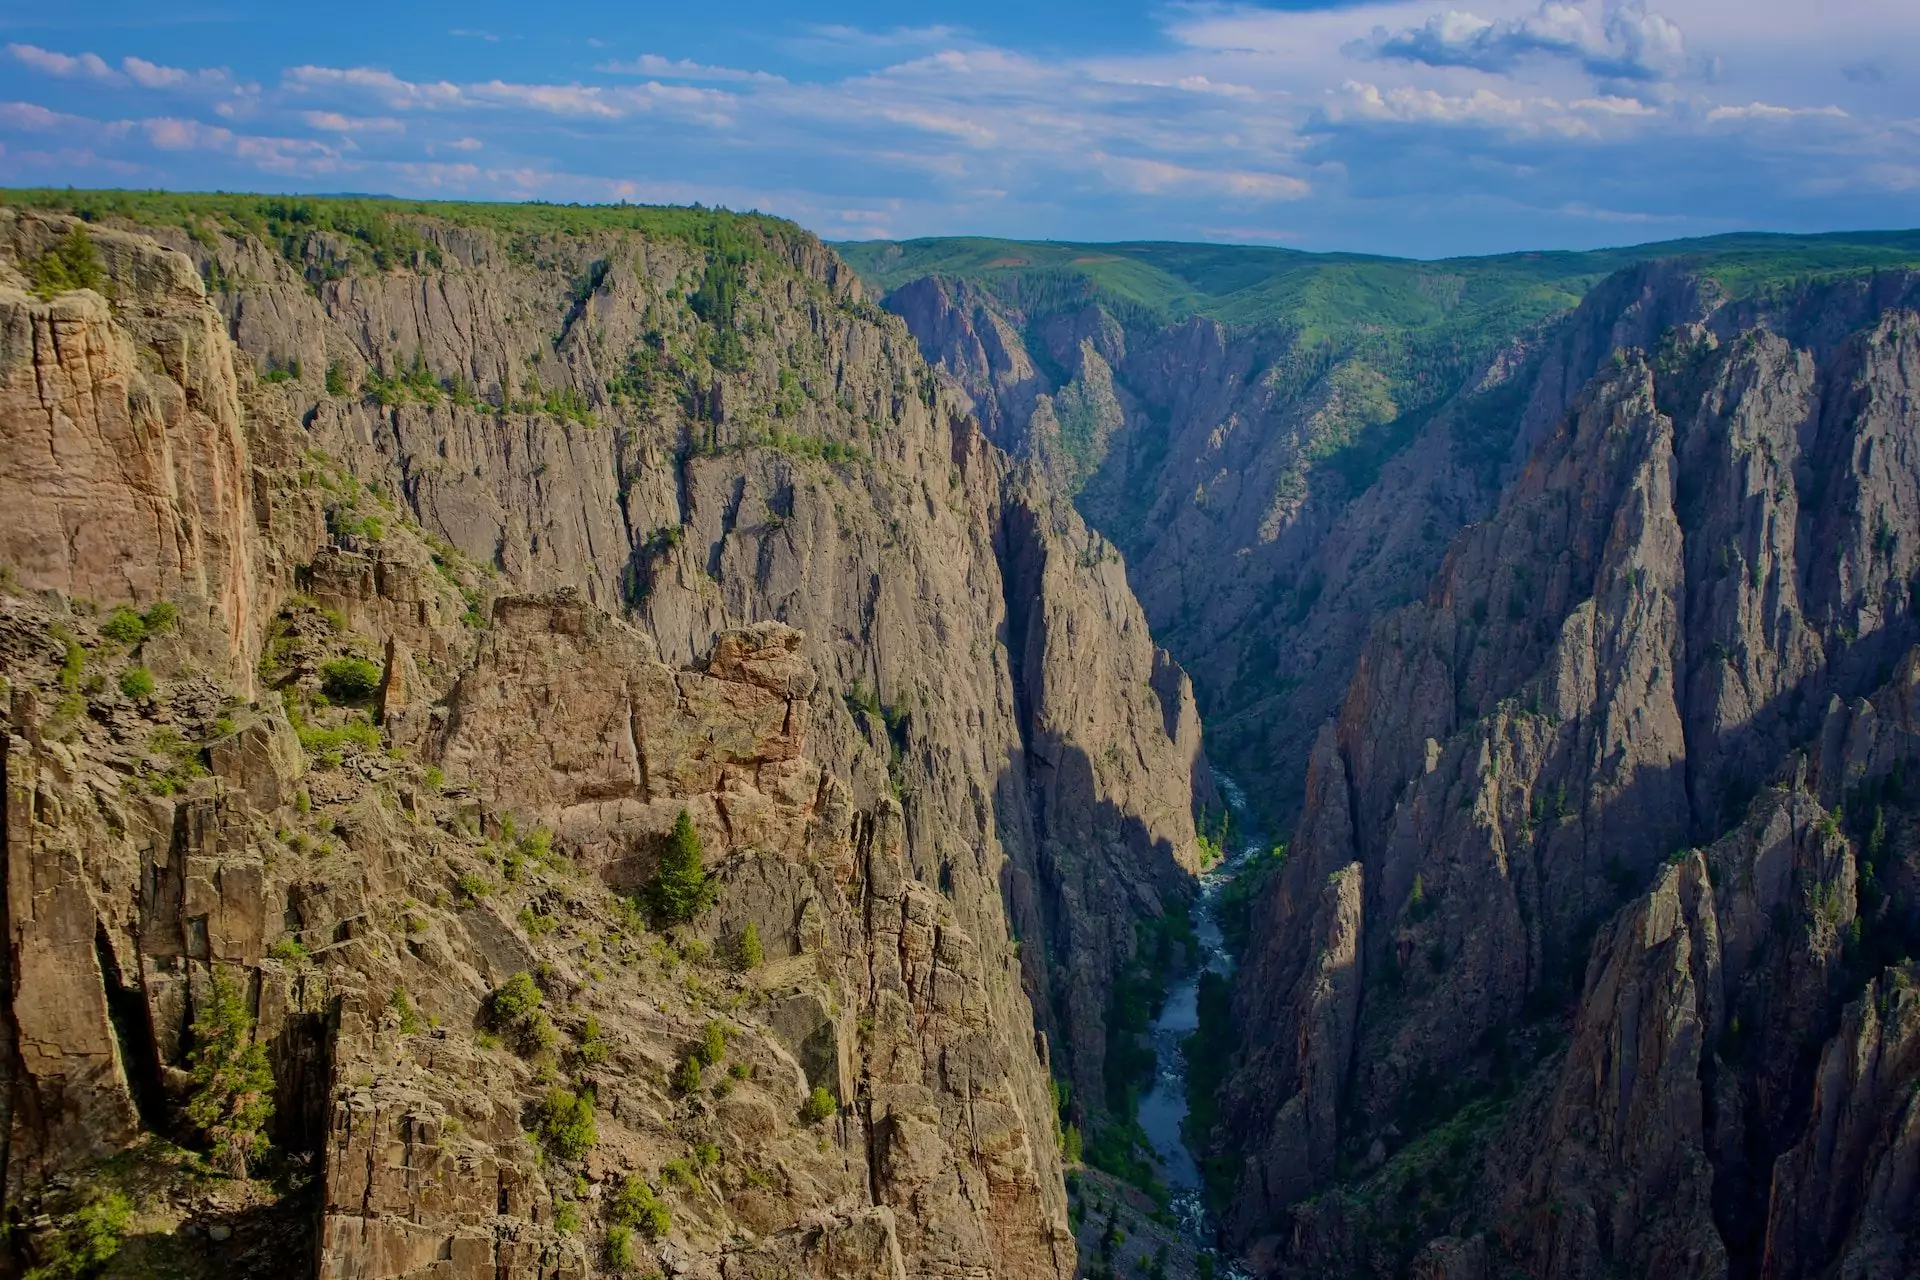 Black Canyon of the Gunnison National Park Image